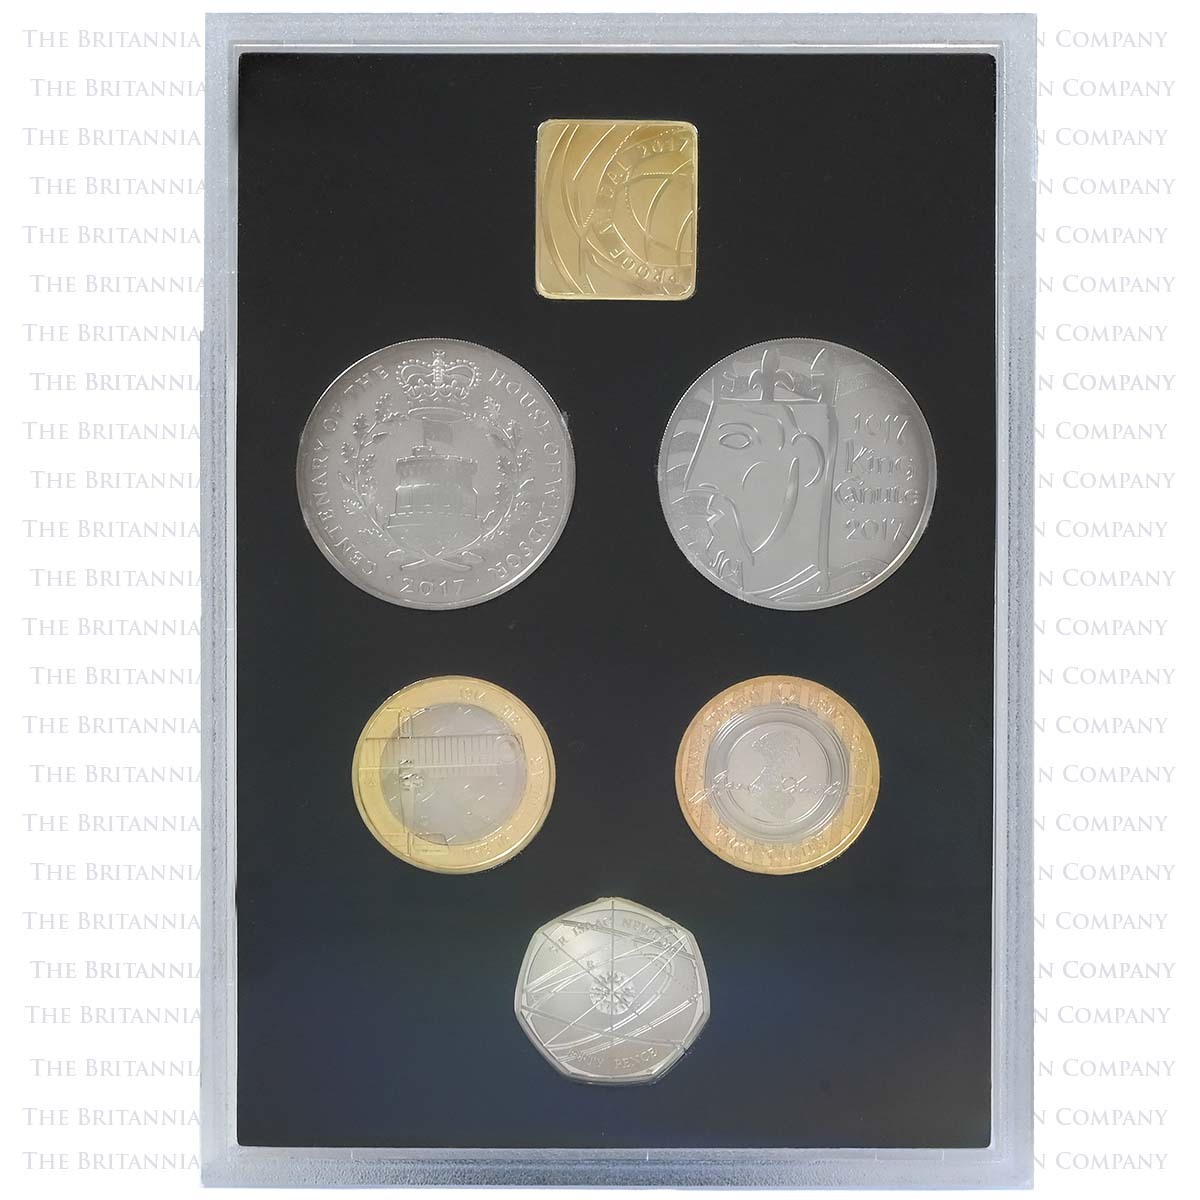 2017-proof-coin-set-collector-edtition-002-m